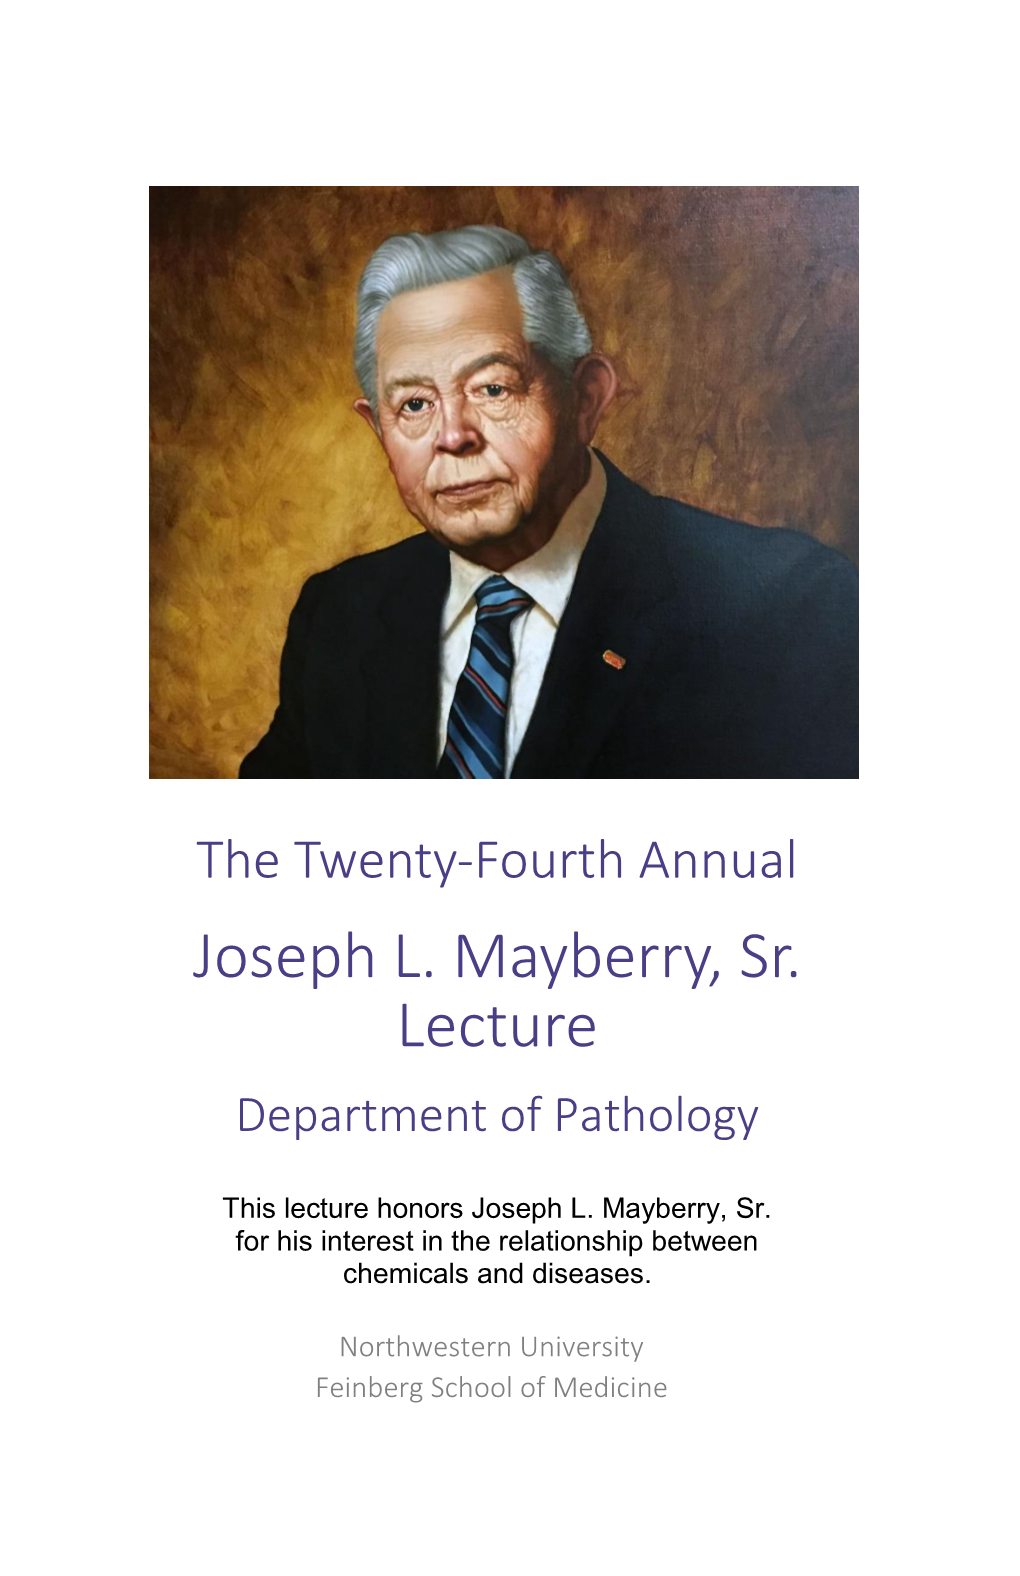 Joseph L. Mayberry, Sr. Lecture Department of Pathology